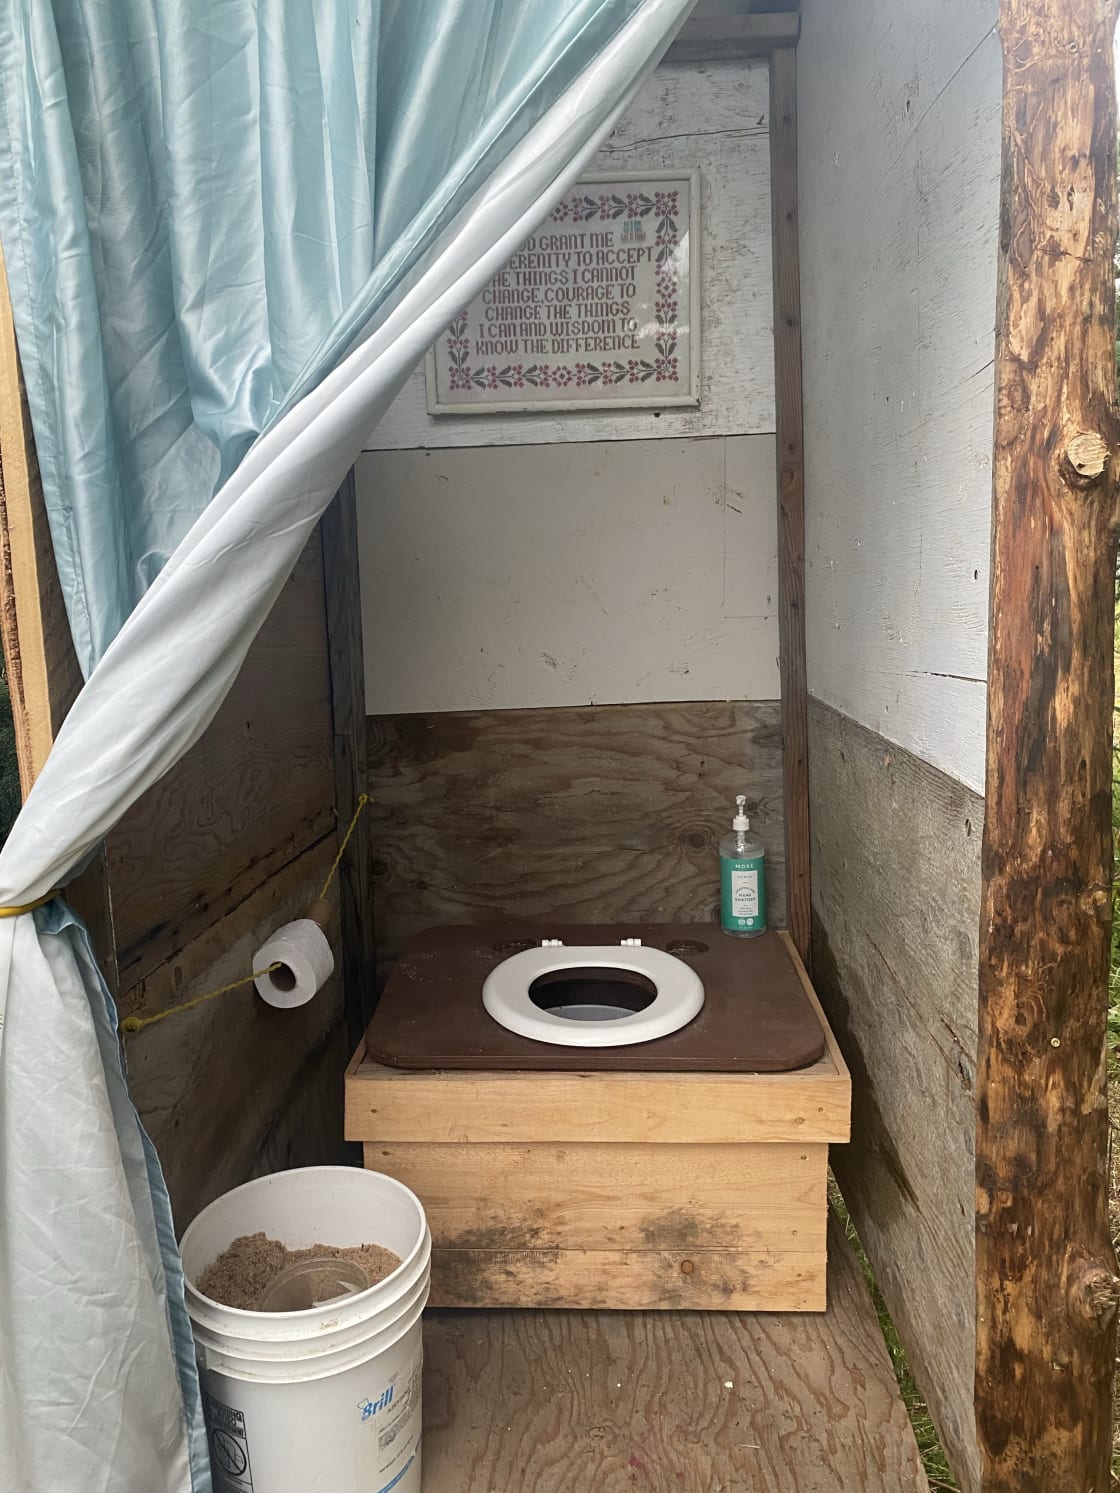 Composting toilet— put sawdust after solids